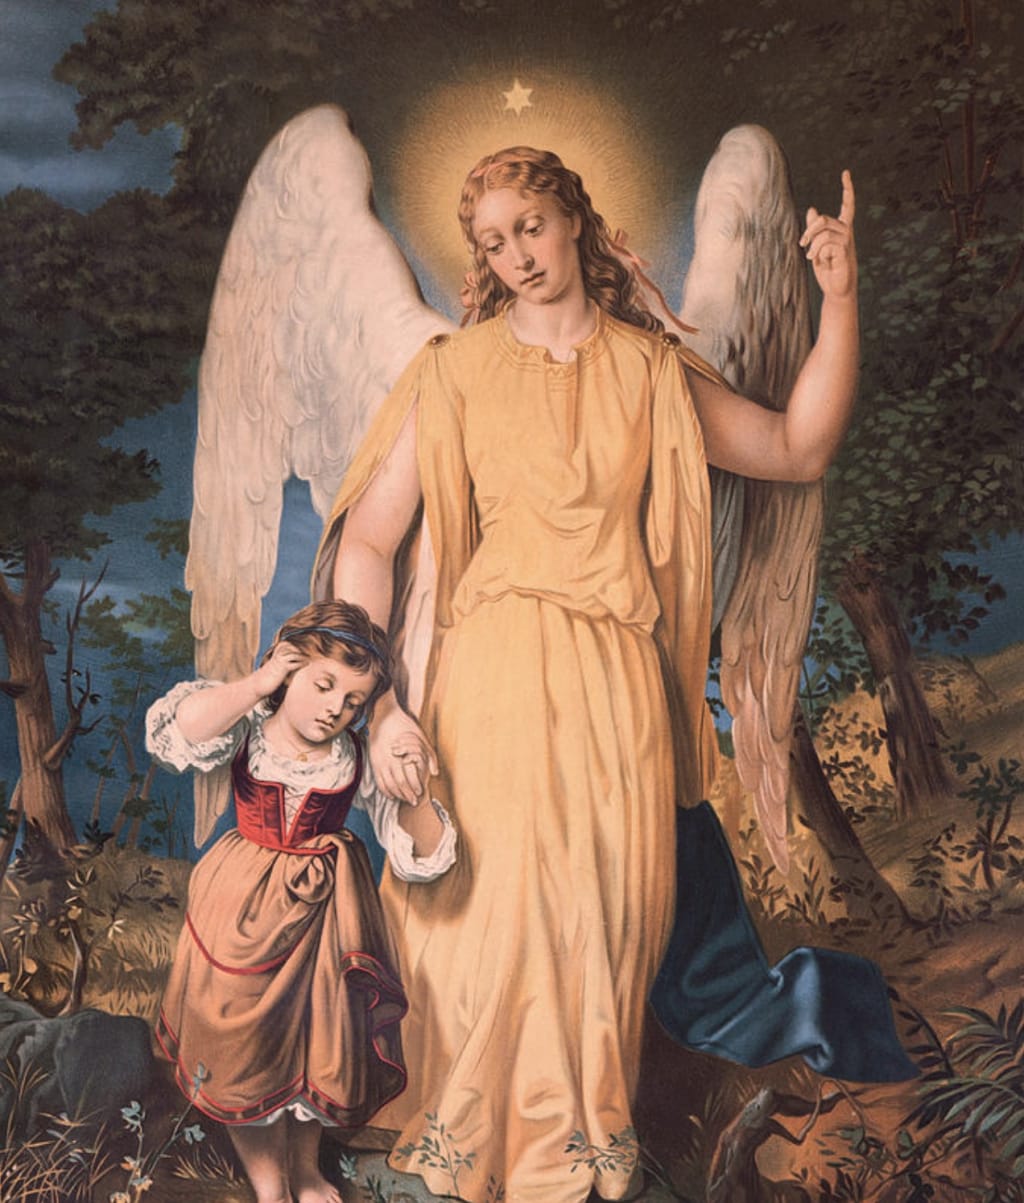 What I learned from my guardian angel